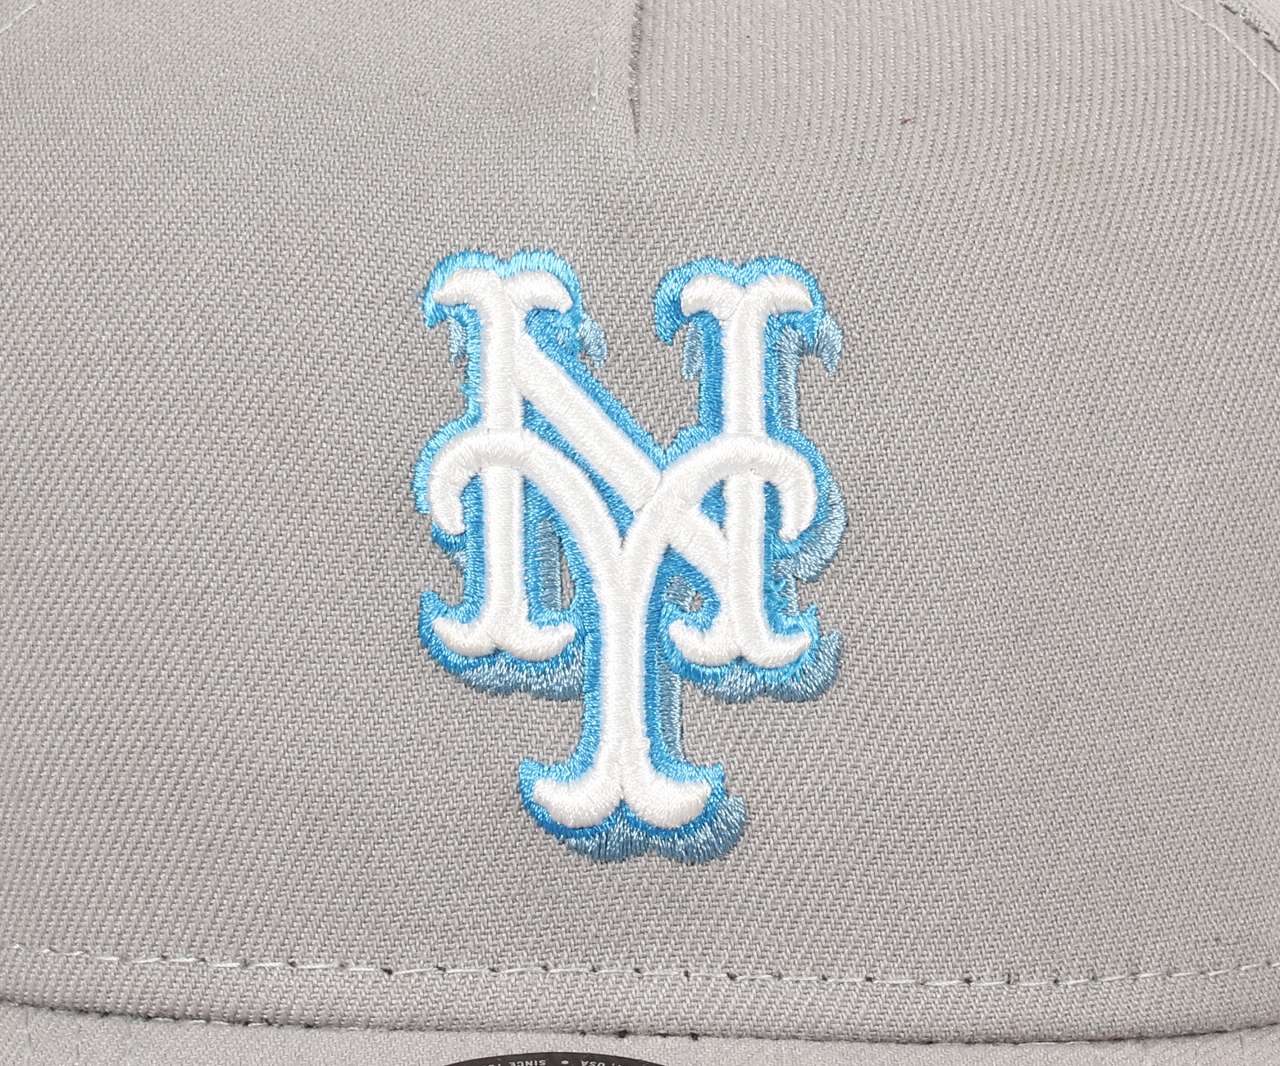 New York Mets MLB  All-Star Game 2011 Sidepatch Cooperstown Gray Sky 9Forty A-Frame Snapback Cap New Era